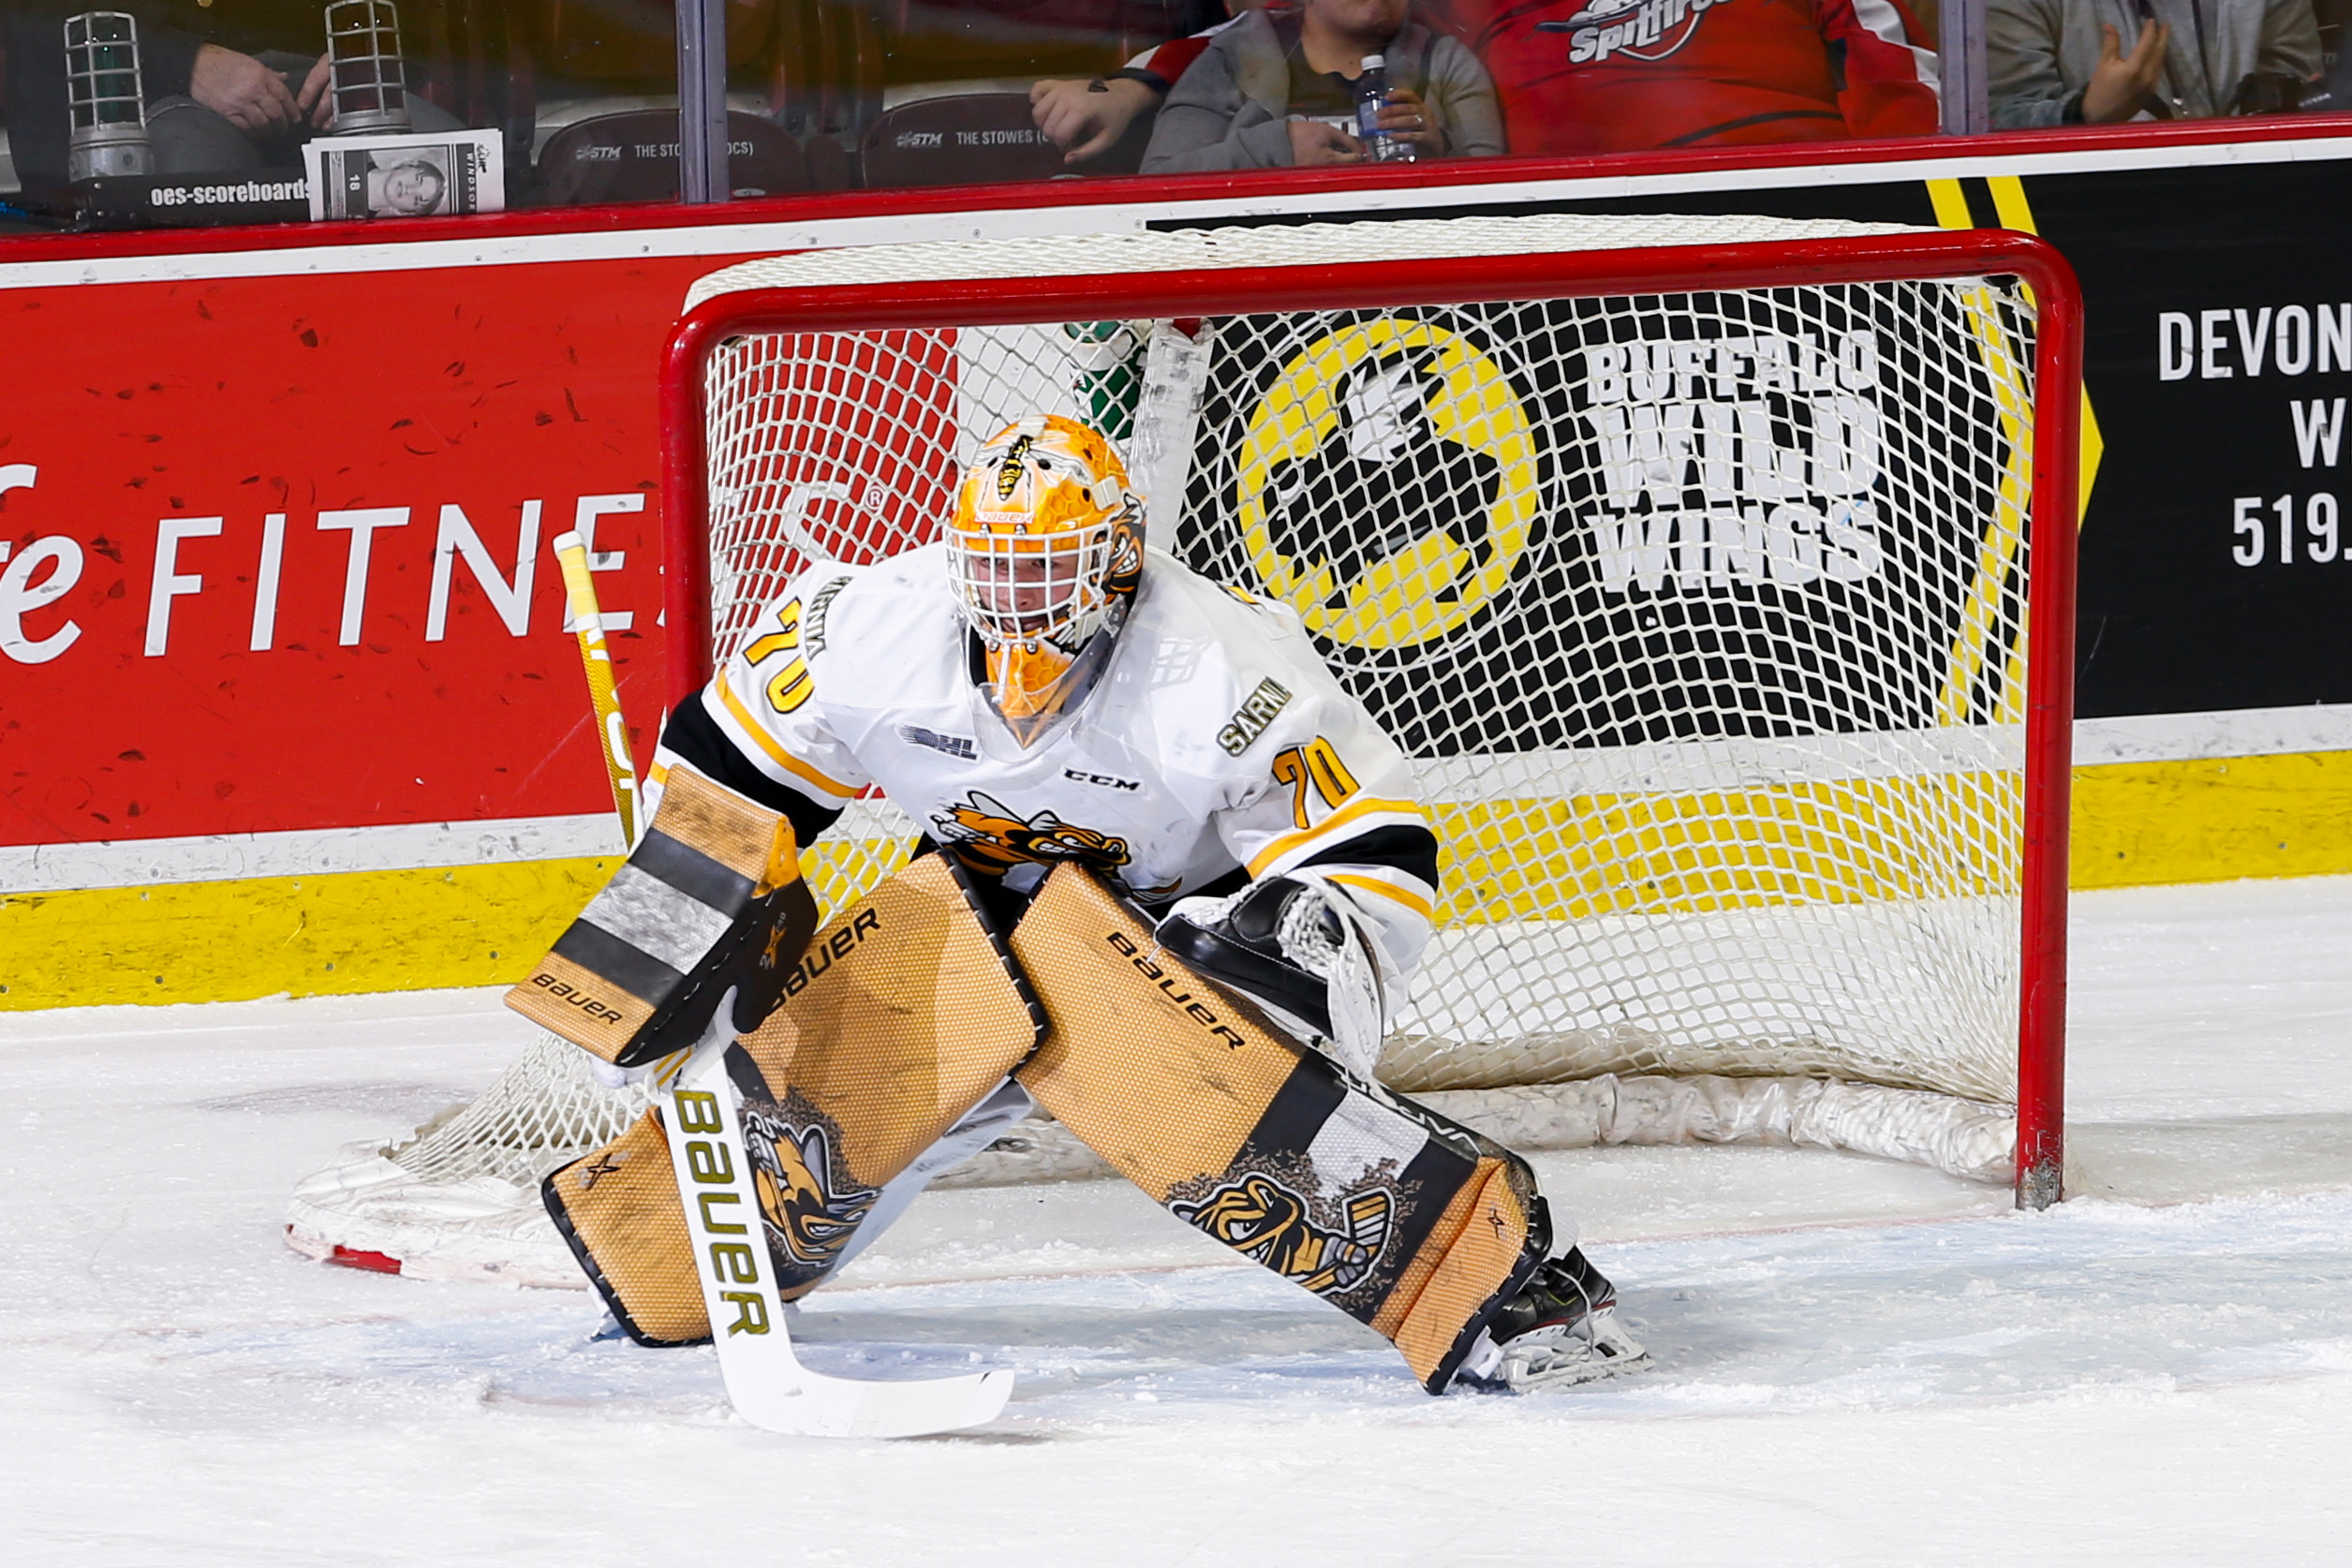 Goaltender Benjamin Gaudreau #70 of the Sarnia Sting skates against the Windsor Spitfires at the WFCU Centre on February 18, 2020 in Windsor, Ontario, Canada.